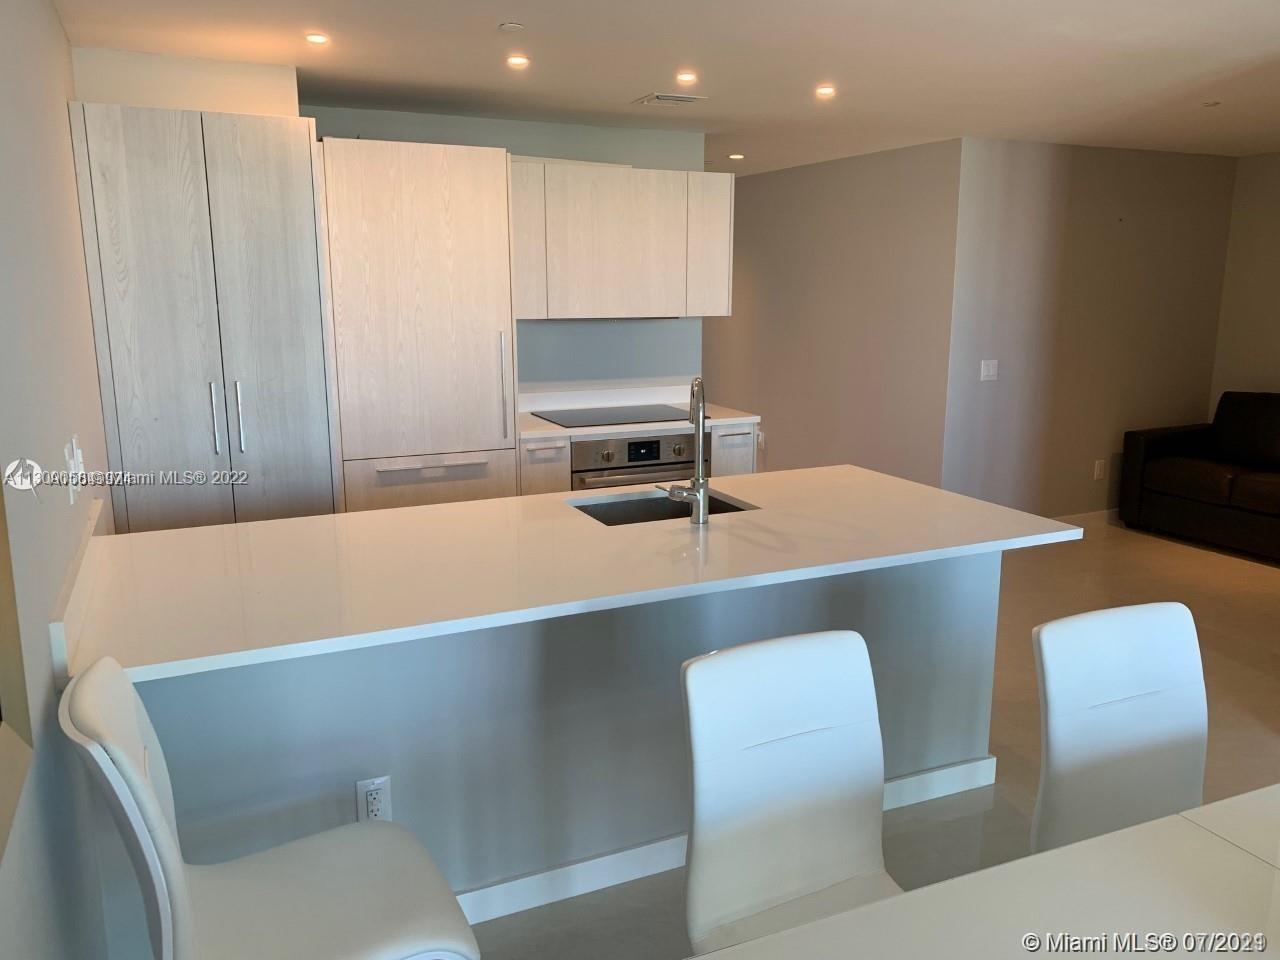 a workspace with stainless steel appliances white cabinets a table and chairs